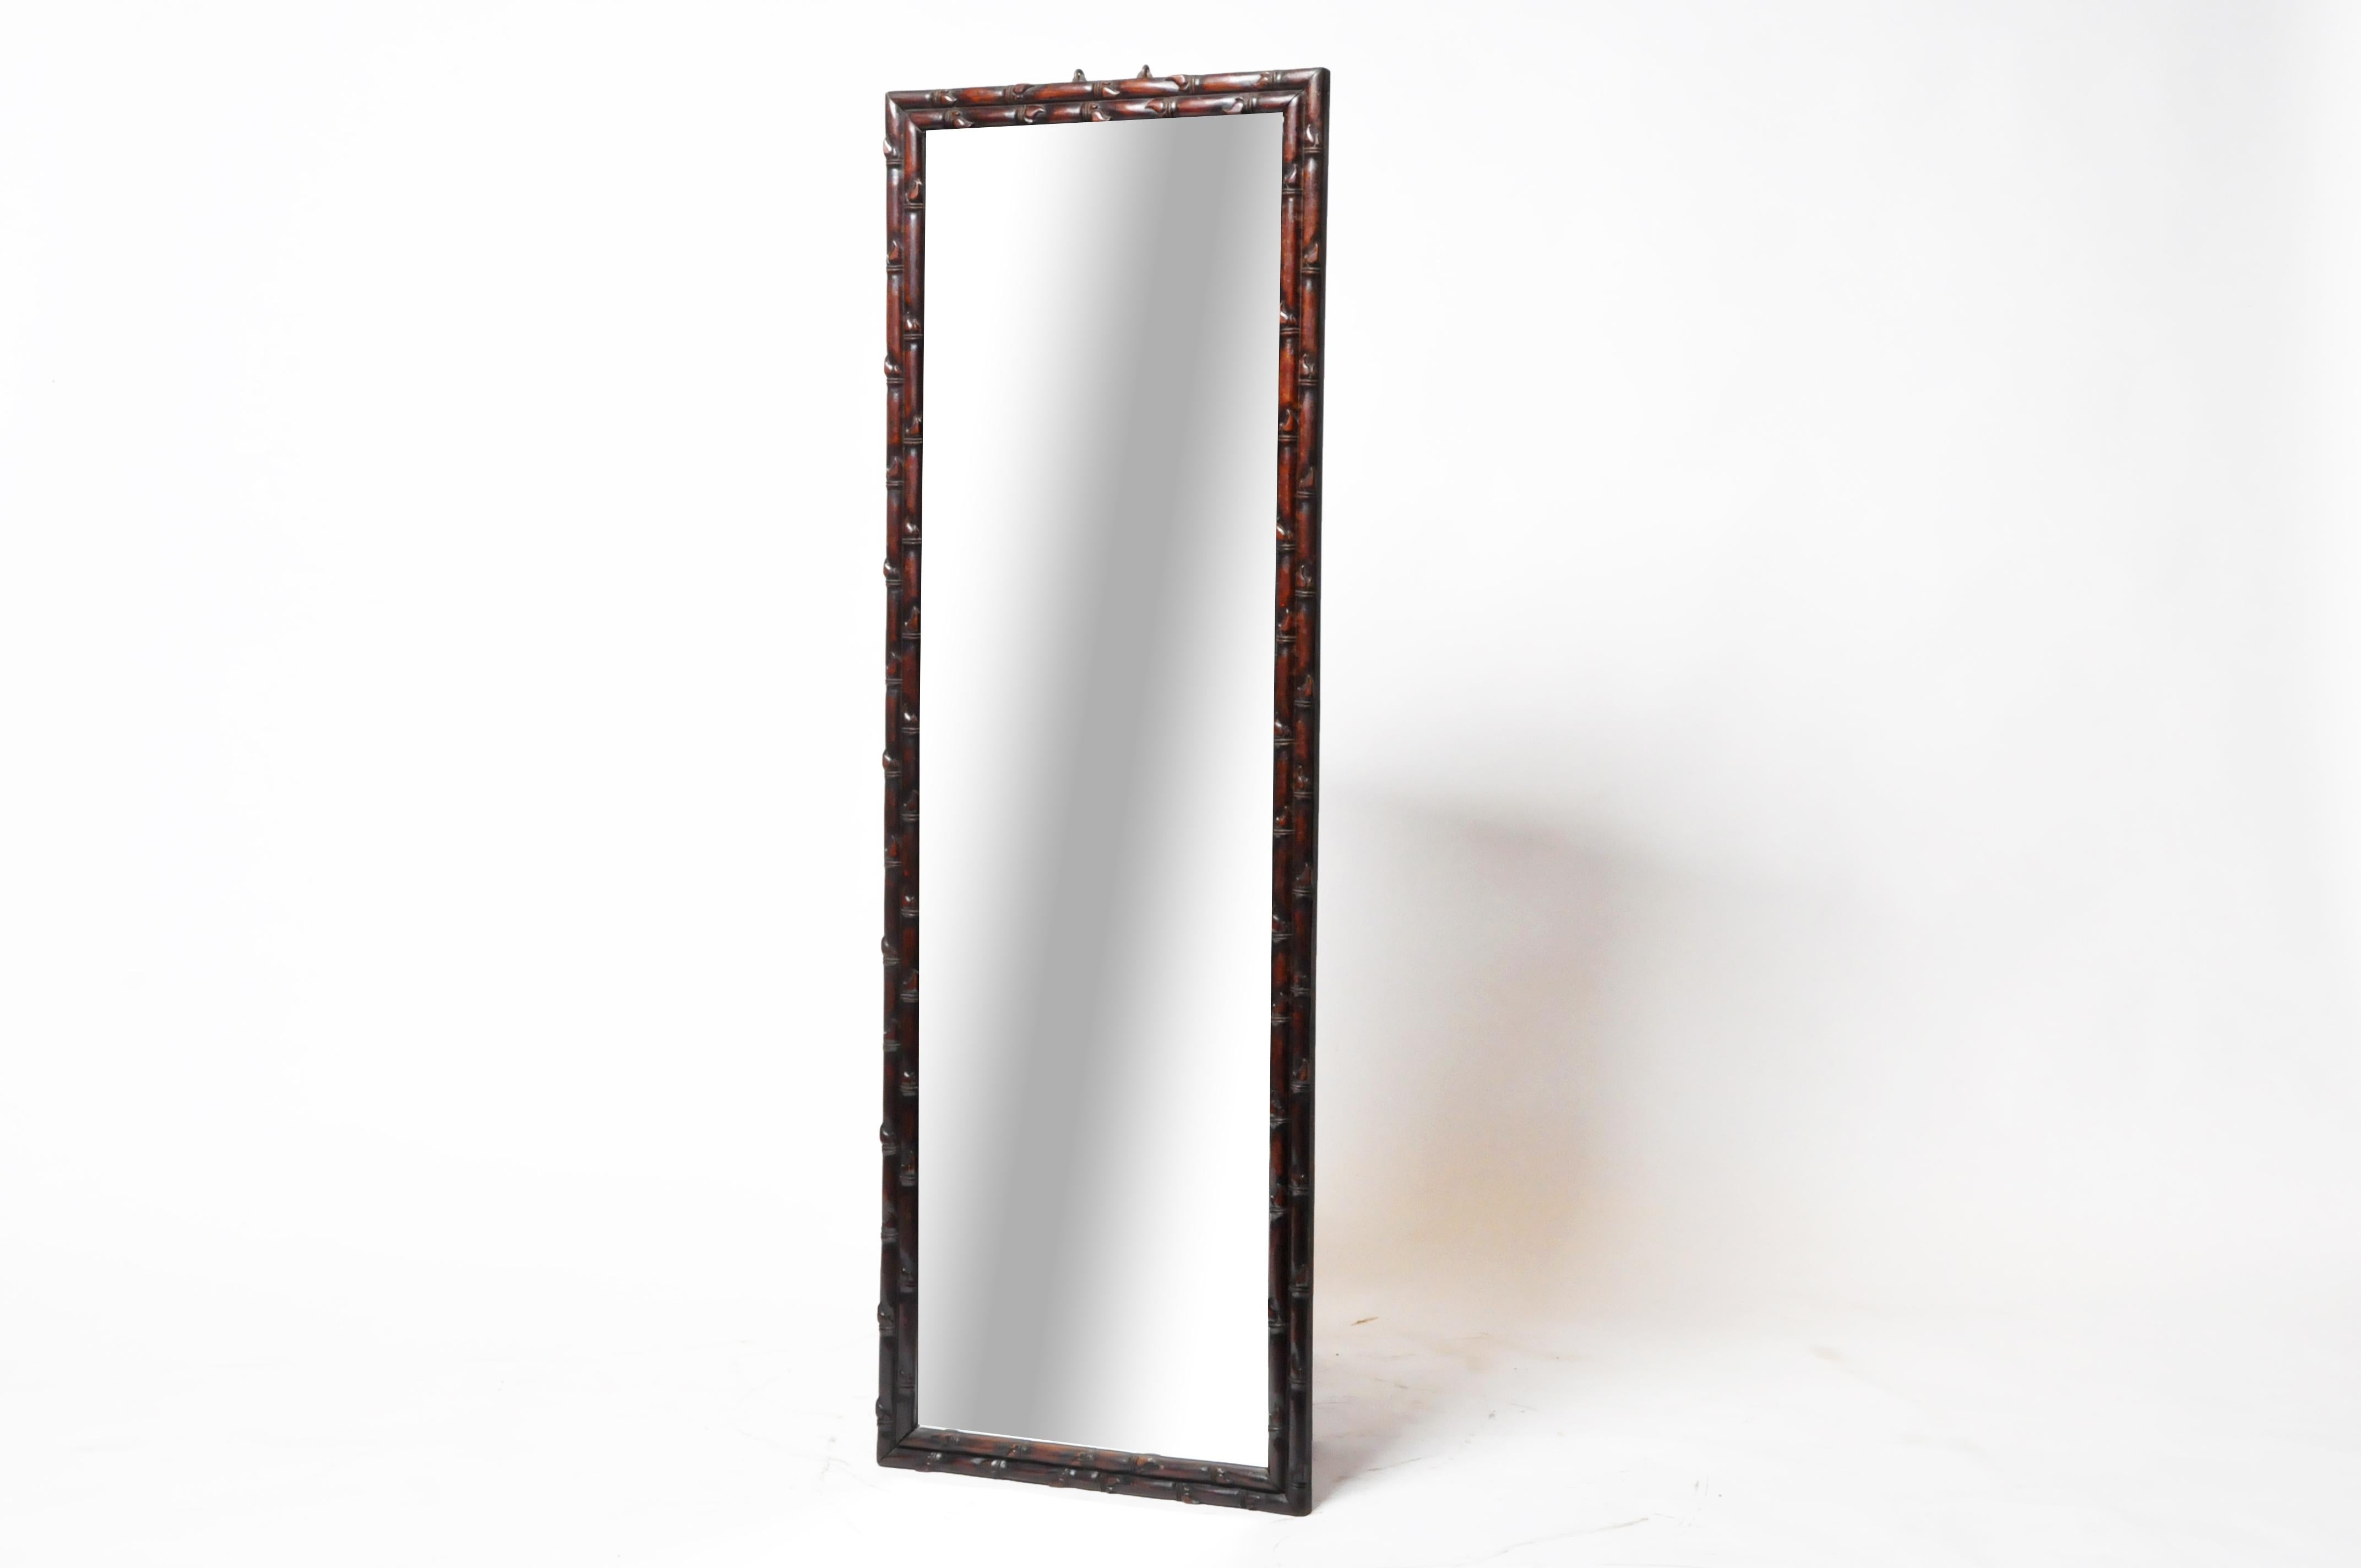 This mirror frame was made in Rangoon from rosewood and carved in a subtle bamboo pattern. The mirror was part of a series found in a Chinese-Burmese home. During the British Colonial period, many Chinese immigrated to Burma from Guangdong Province